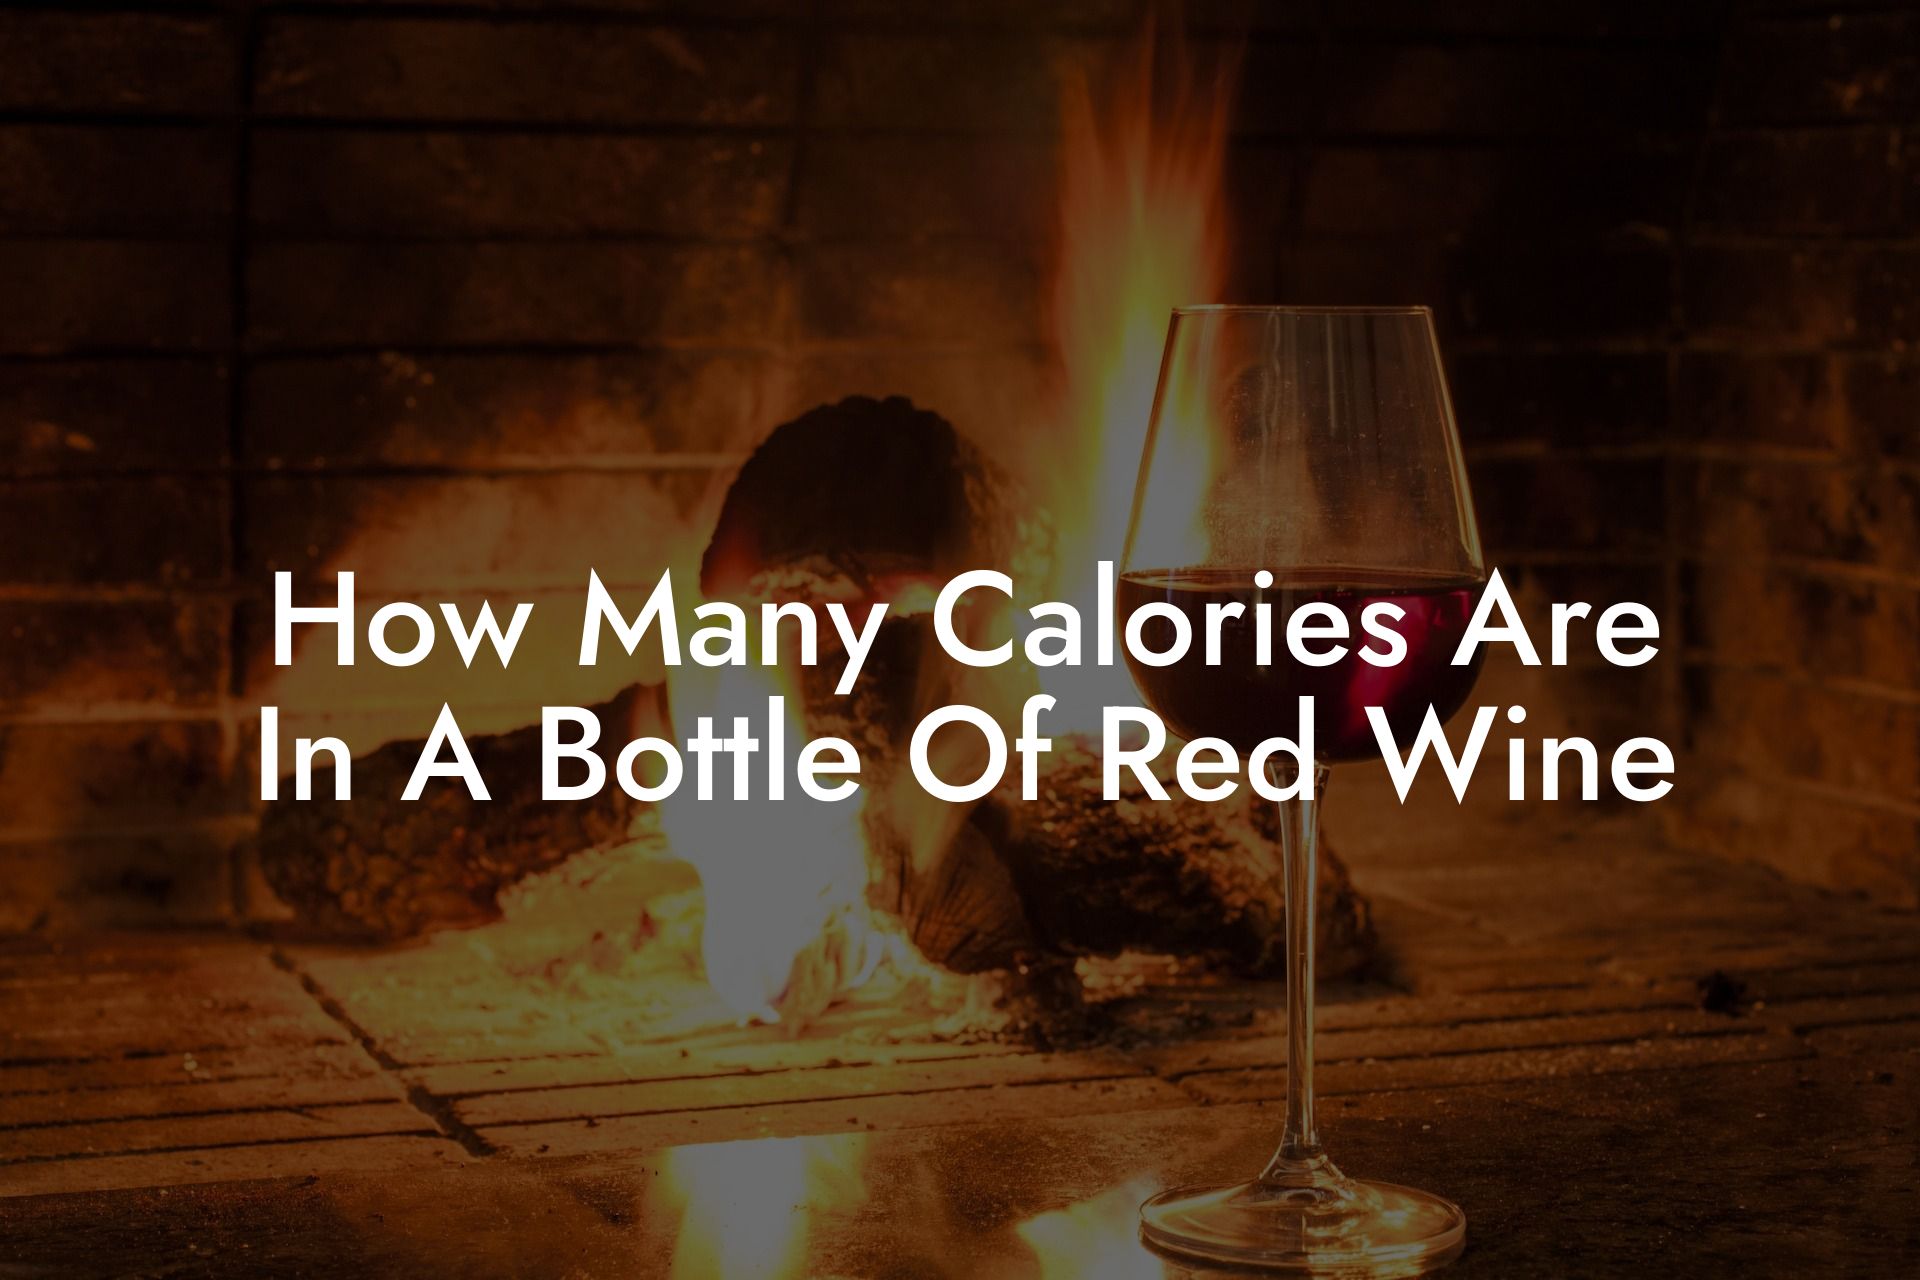 How Many Calories Are In A Bottle Of Red Wine